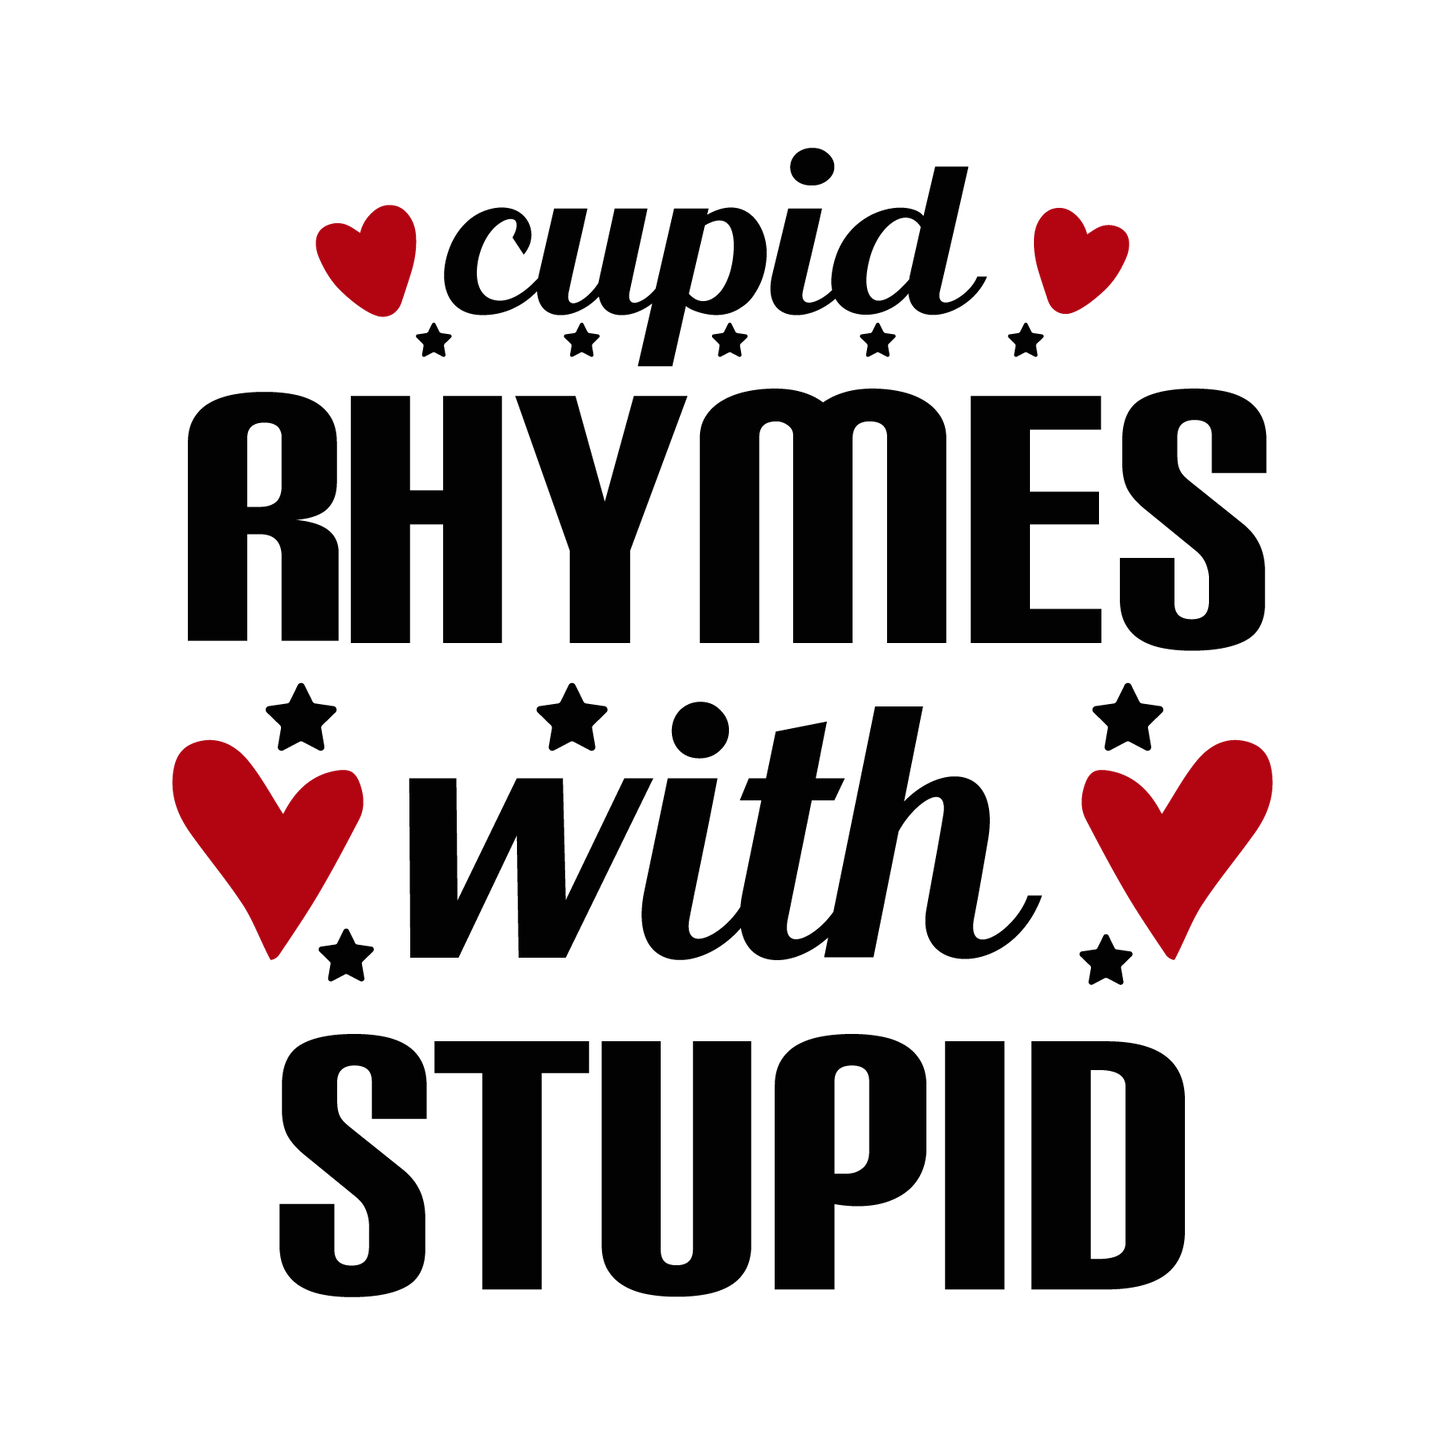 VALENTINE'S DAY PRINT 68 - cupid rhymes with stupid-01